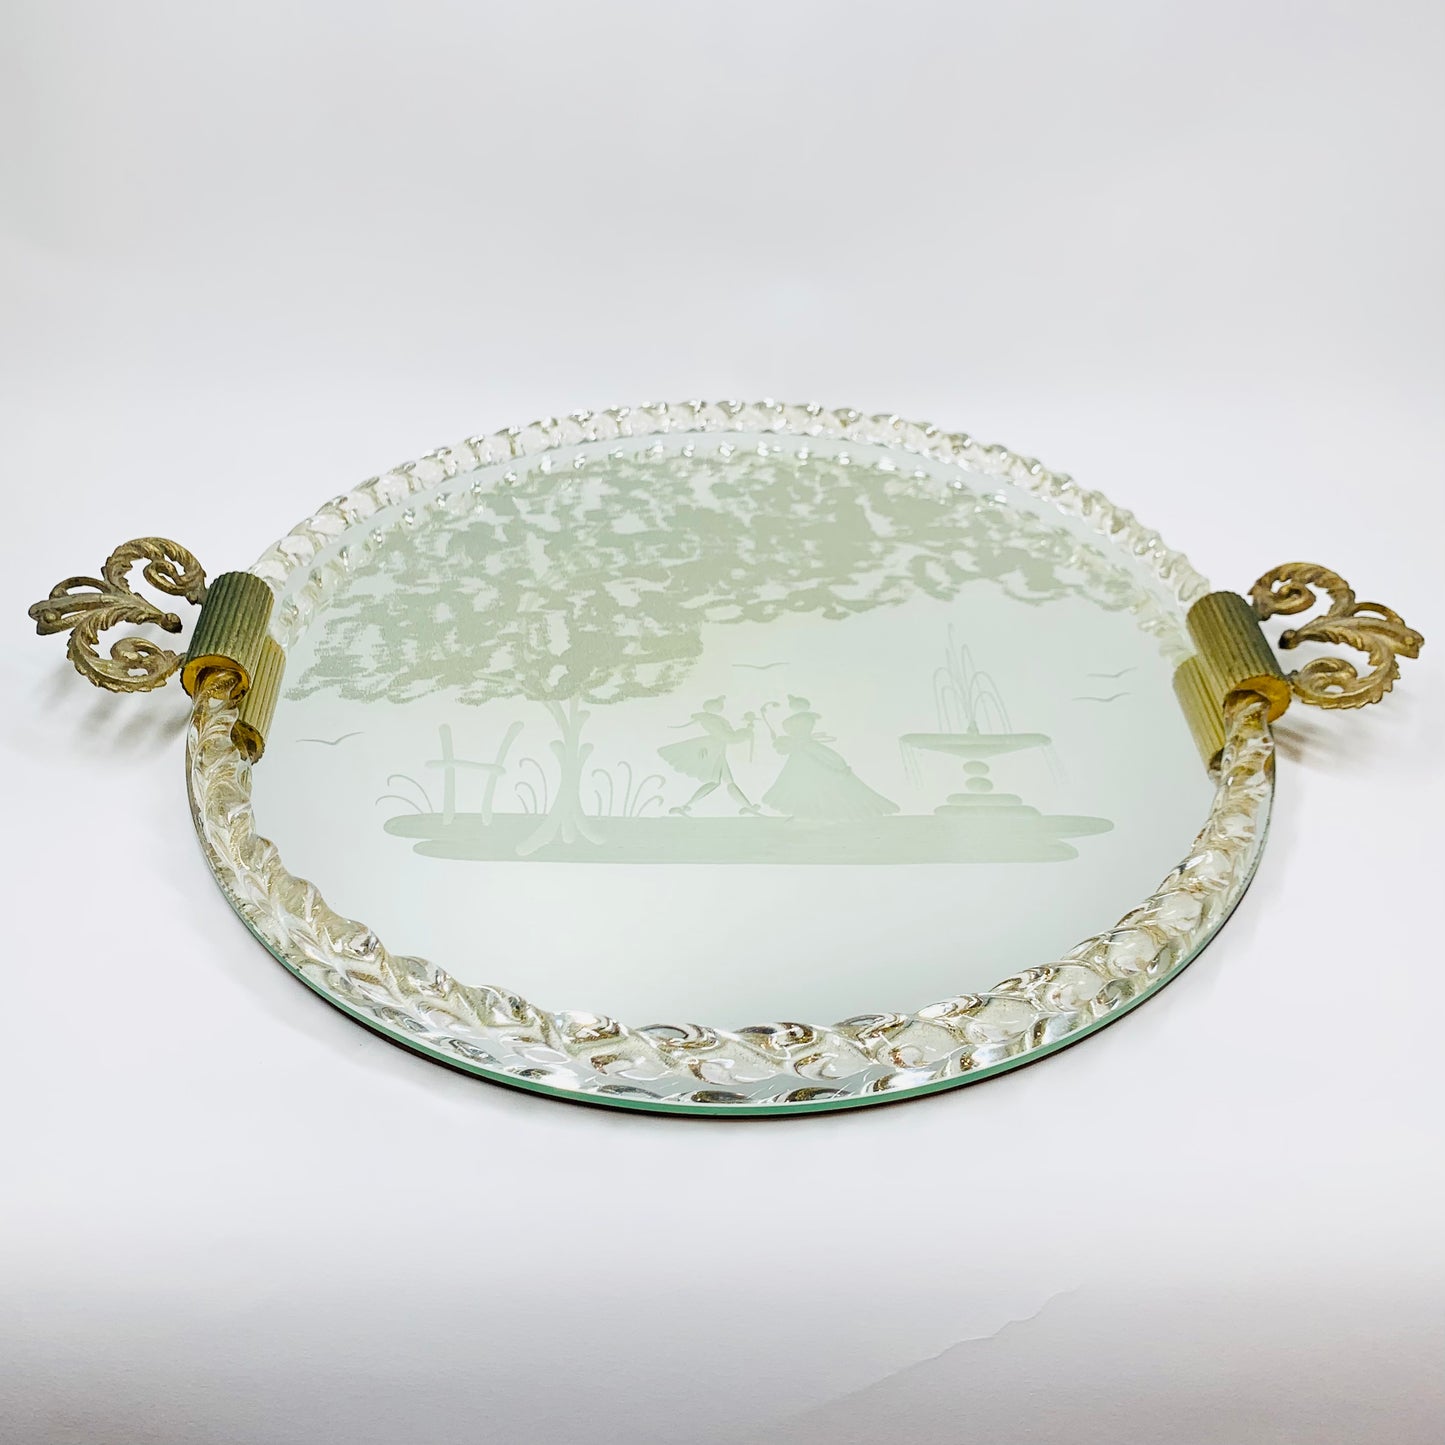 1940s hand etched mirror tray with gold aventurine rope border